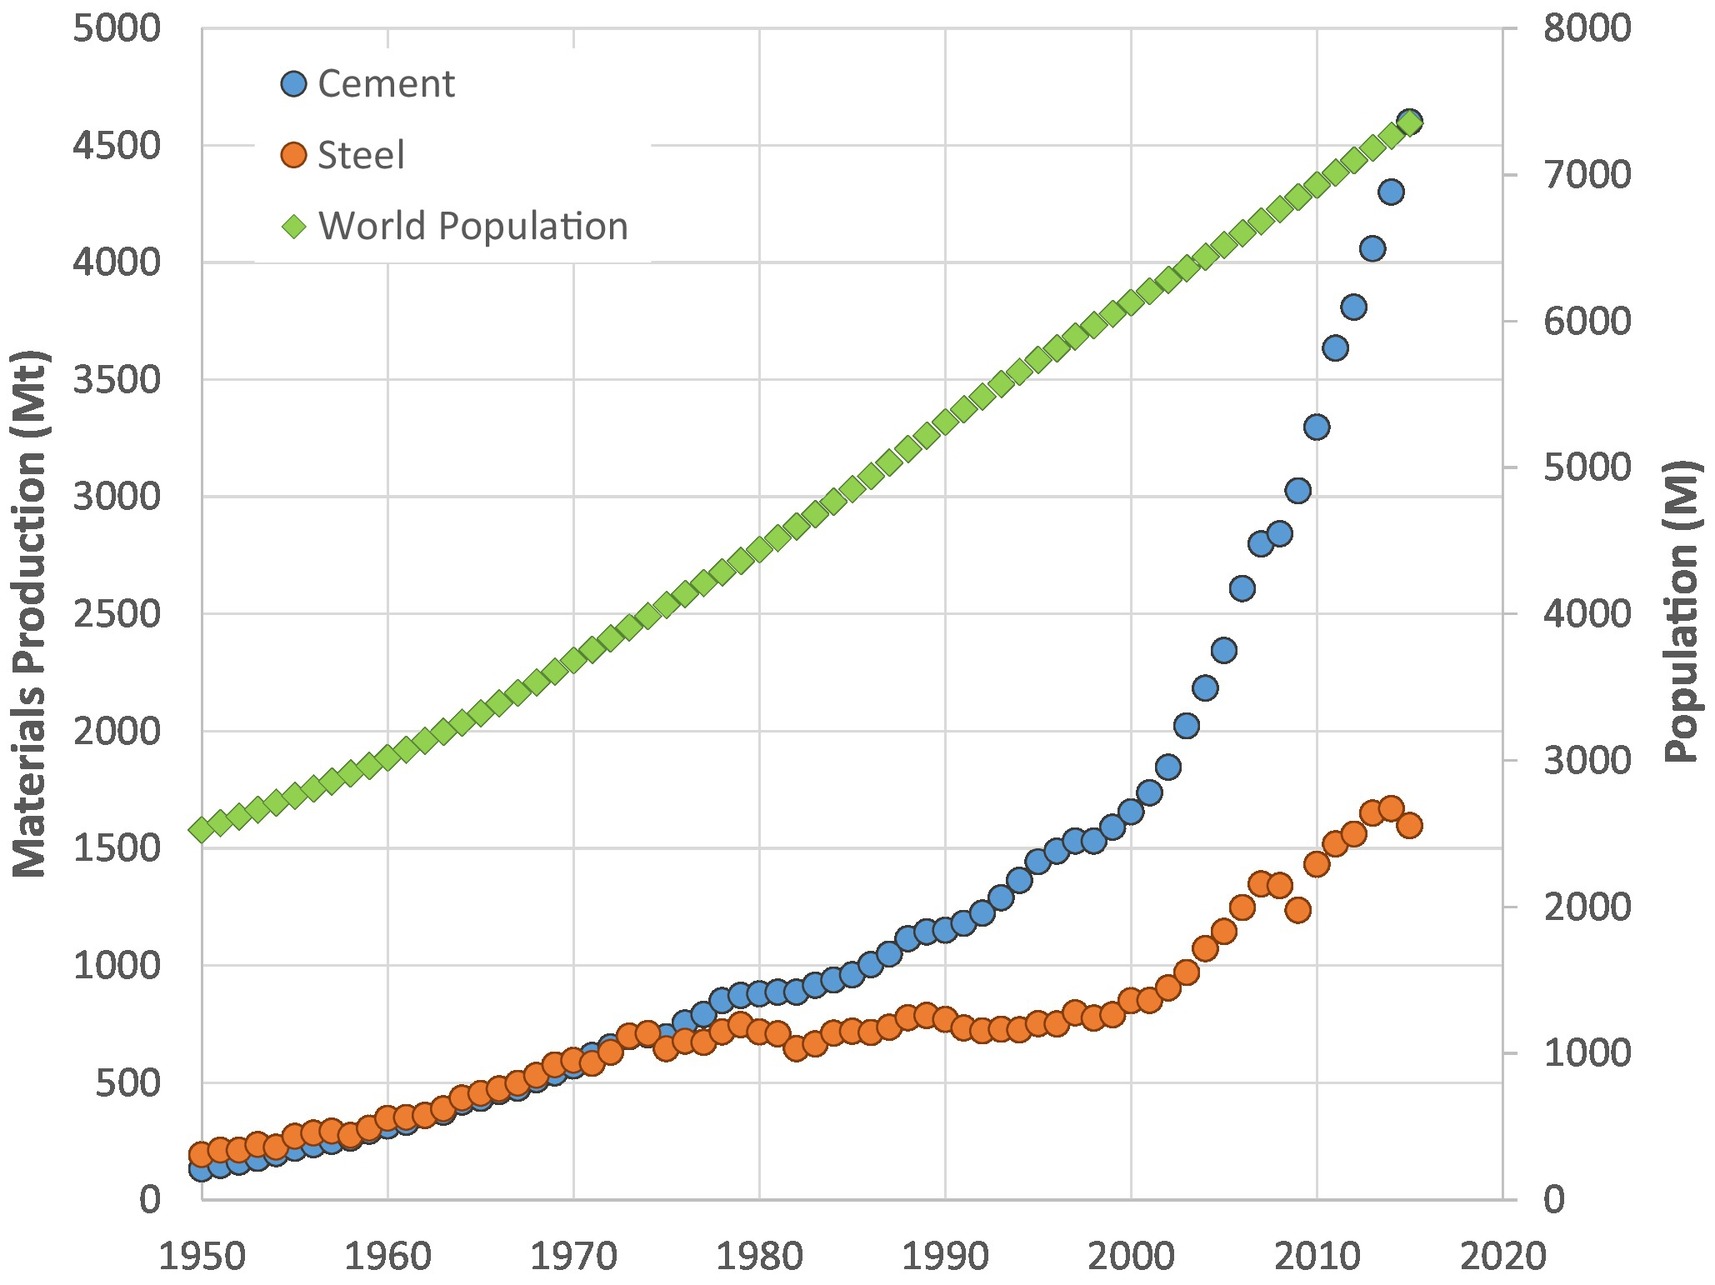 World population, cement production and steel production (1950-2015)